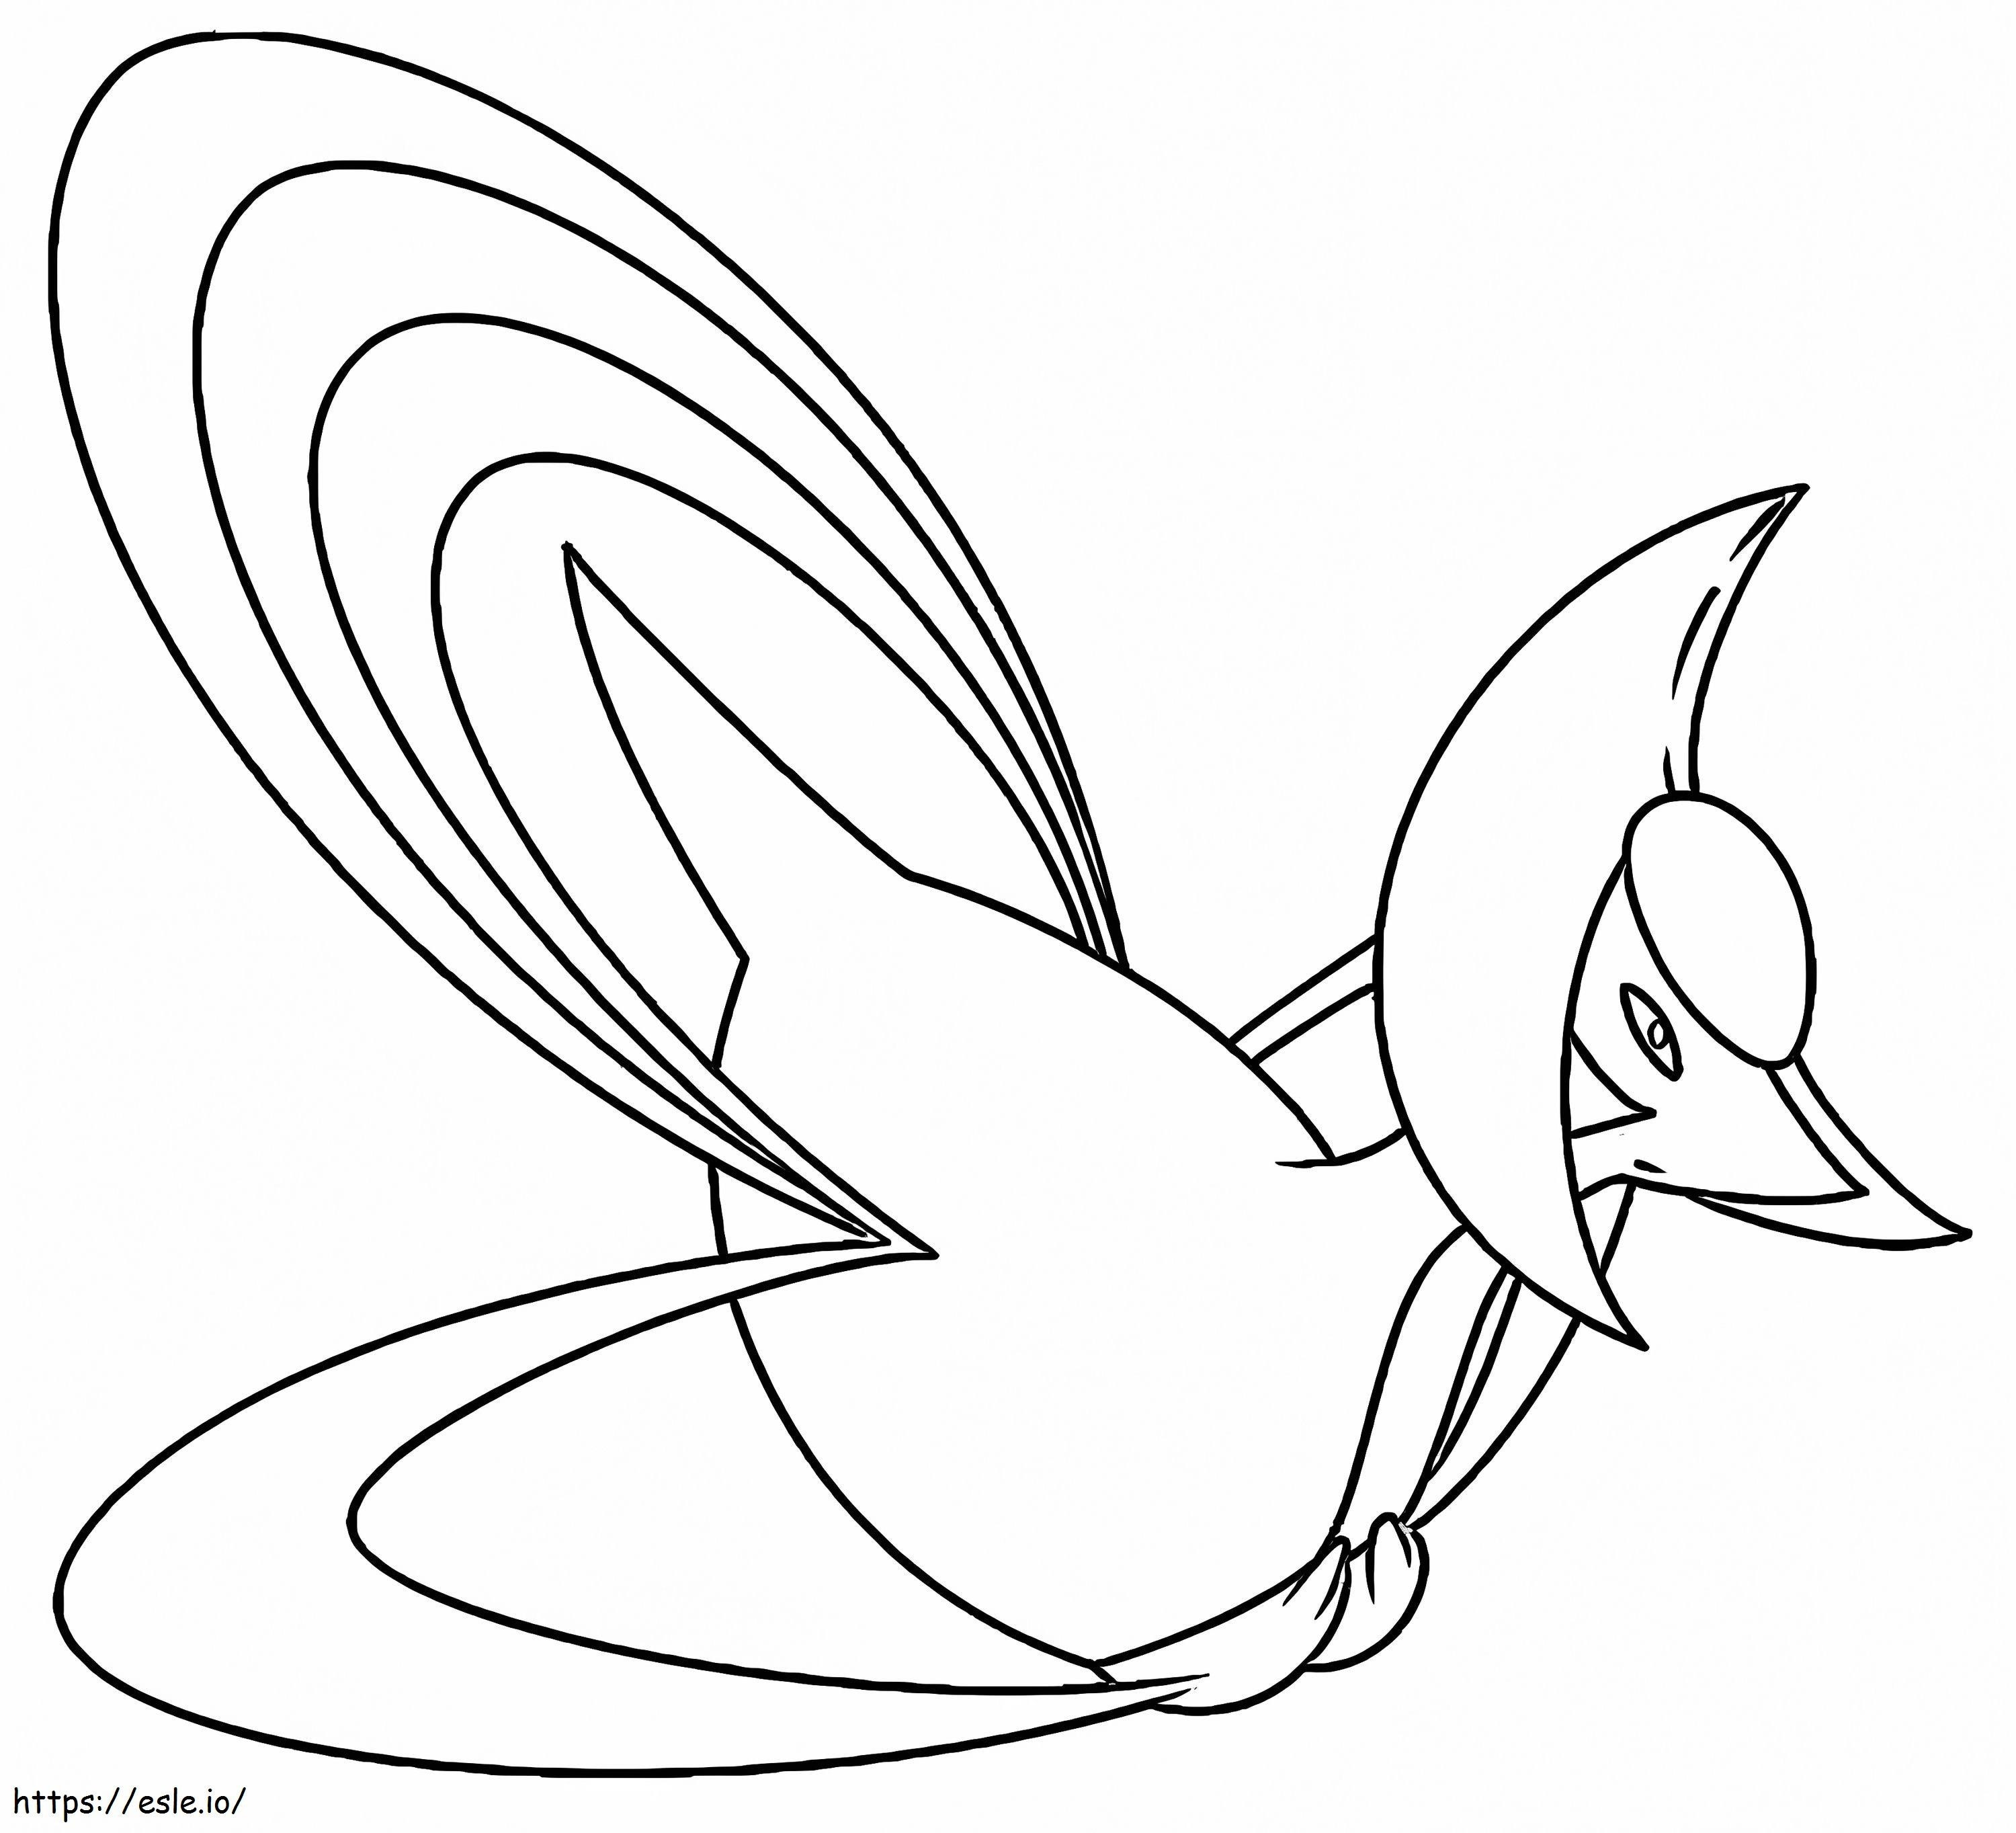 Cresselia 1 coloring page